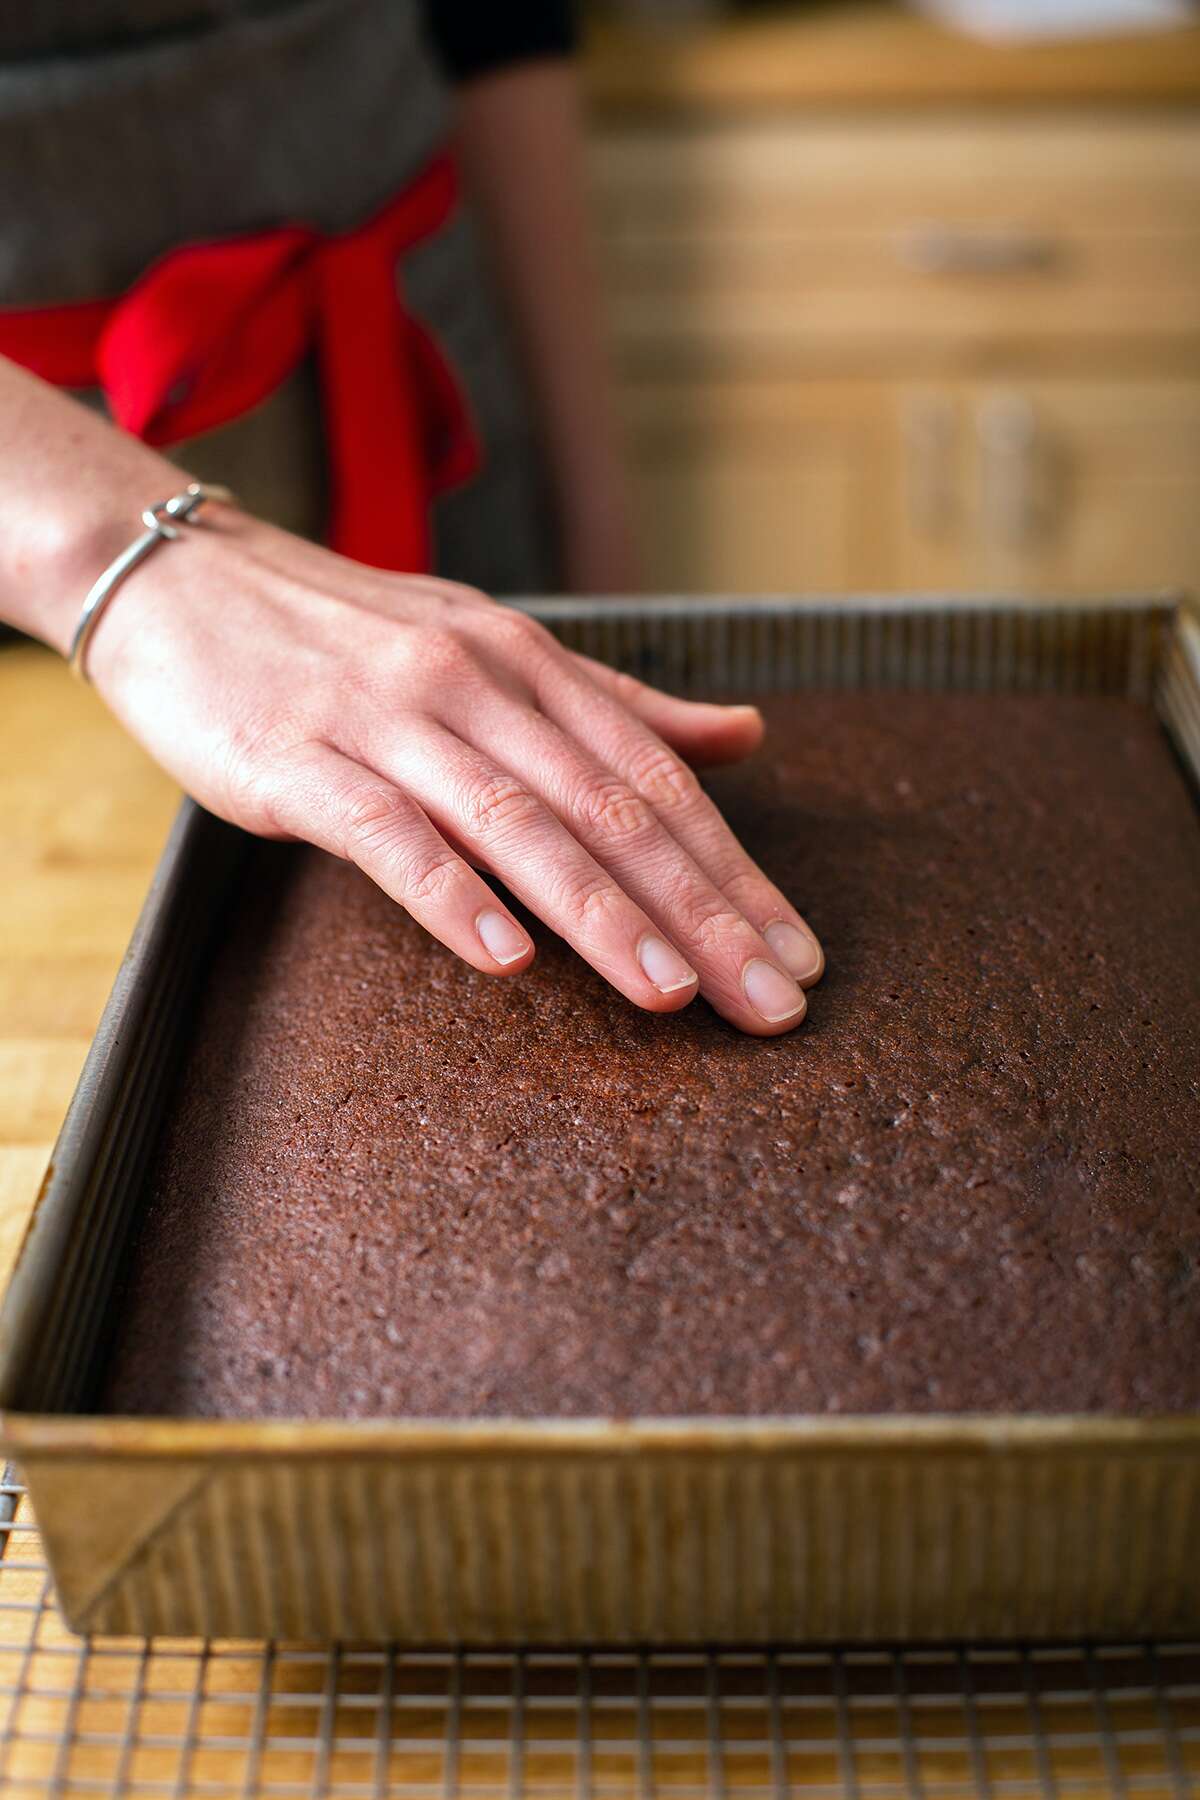 A baker presses on the center of a chocolate cake to see if it has